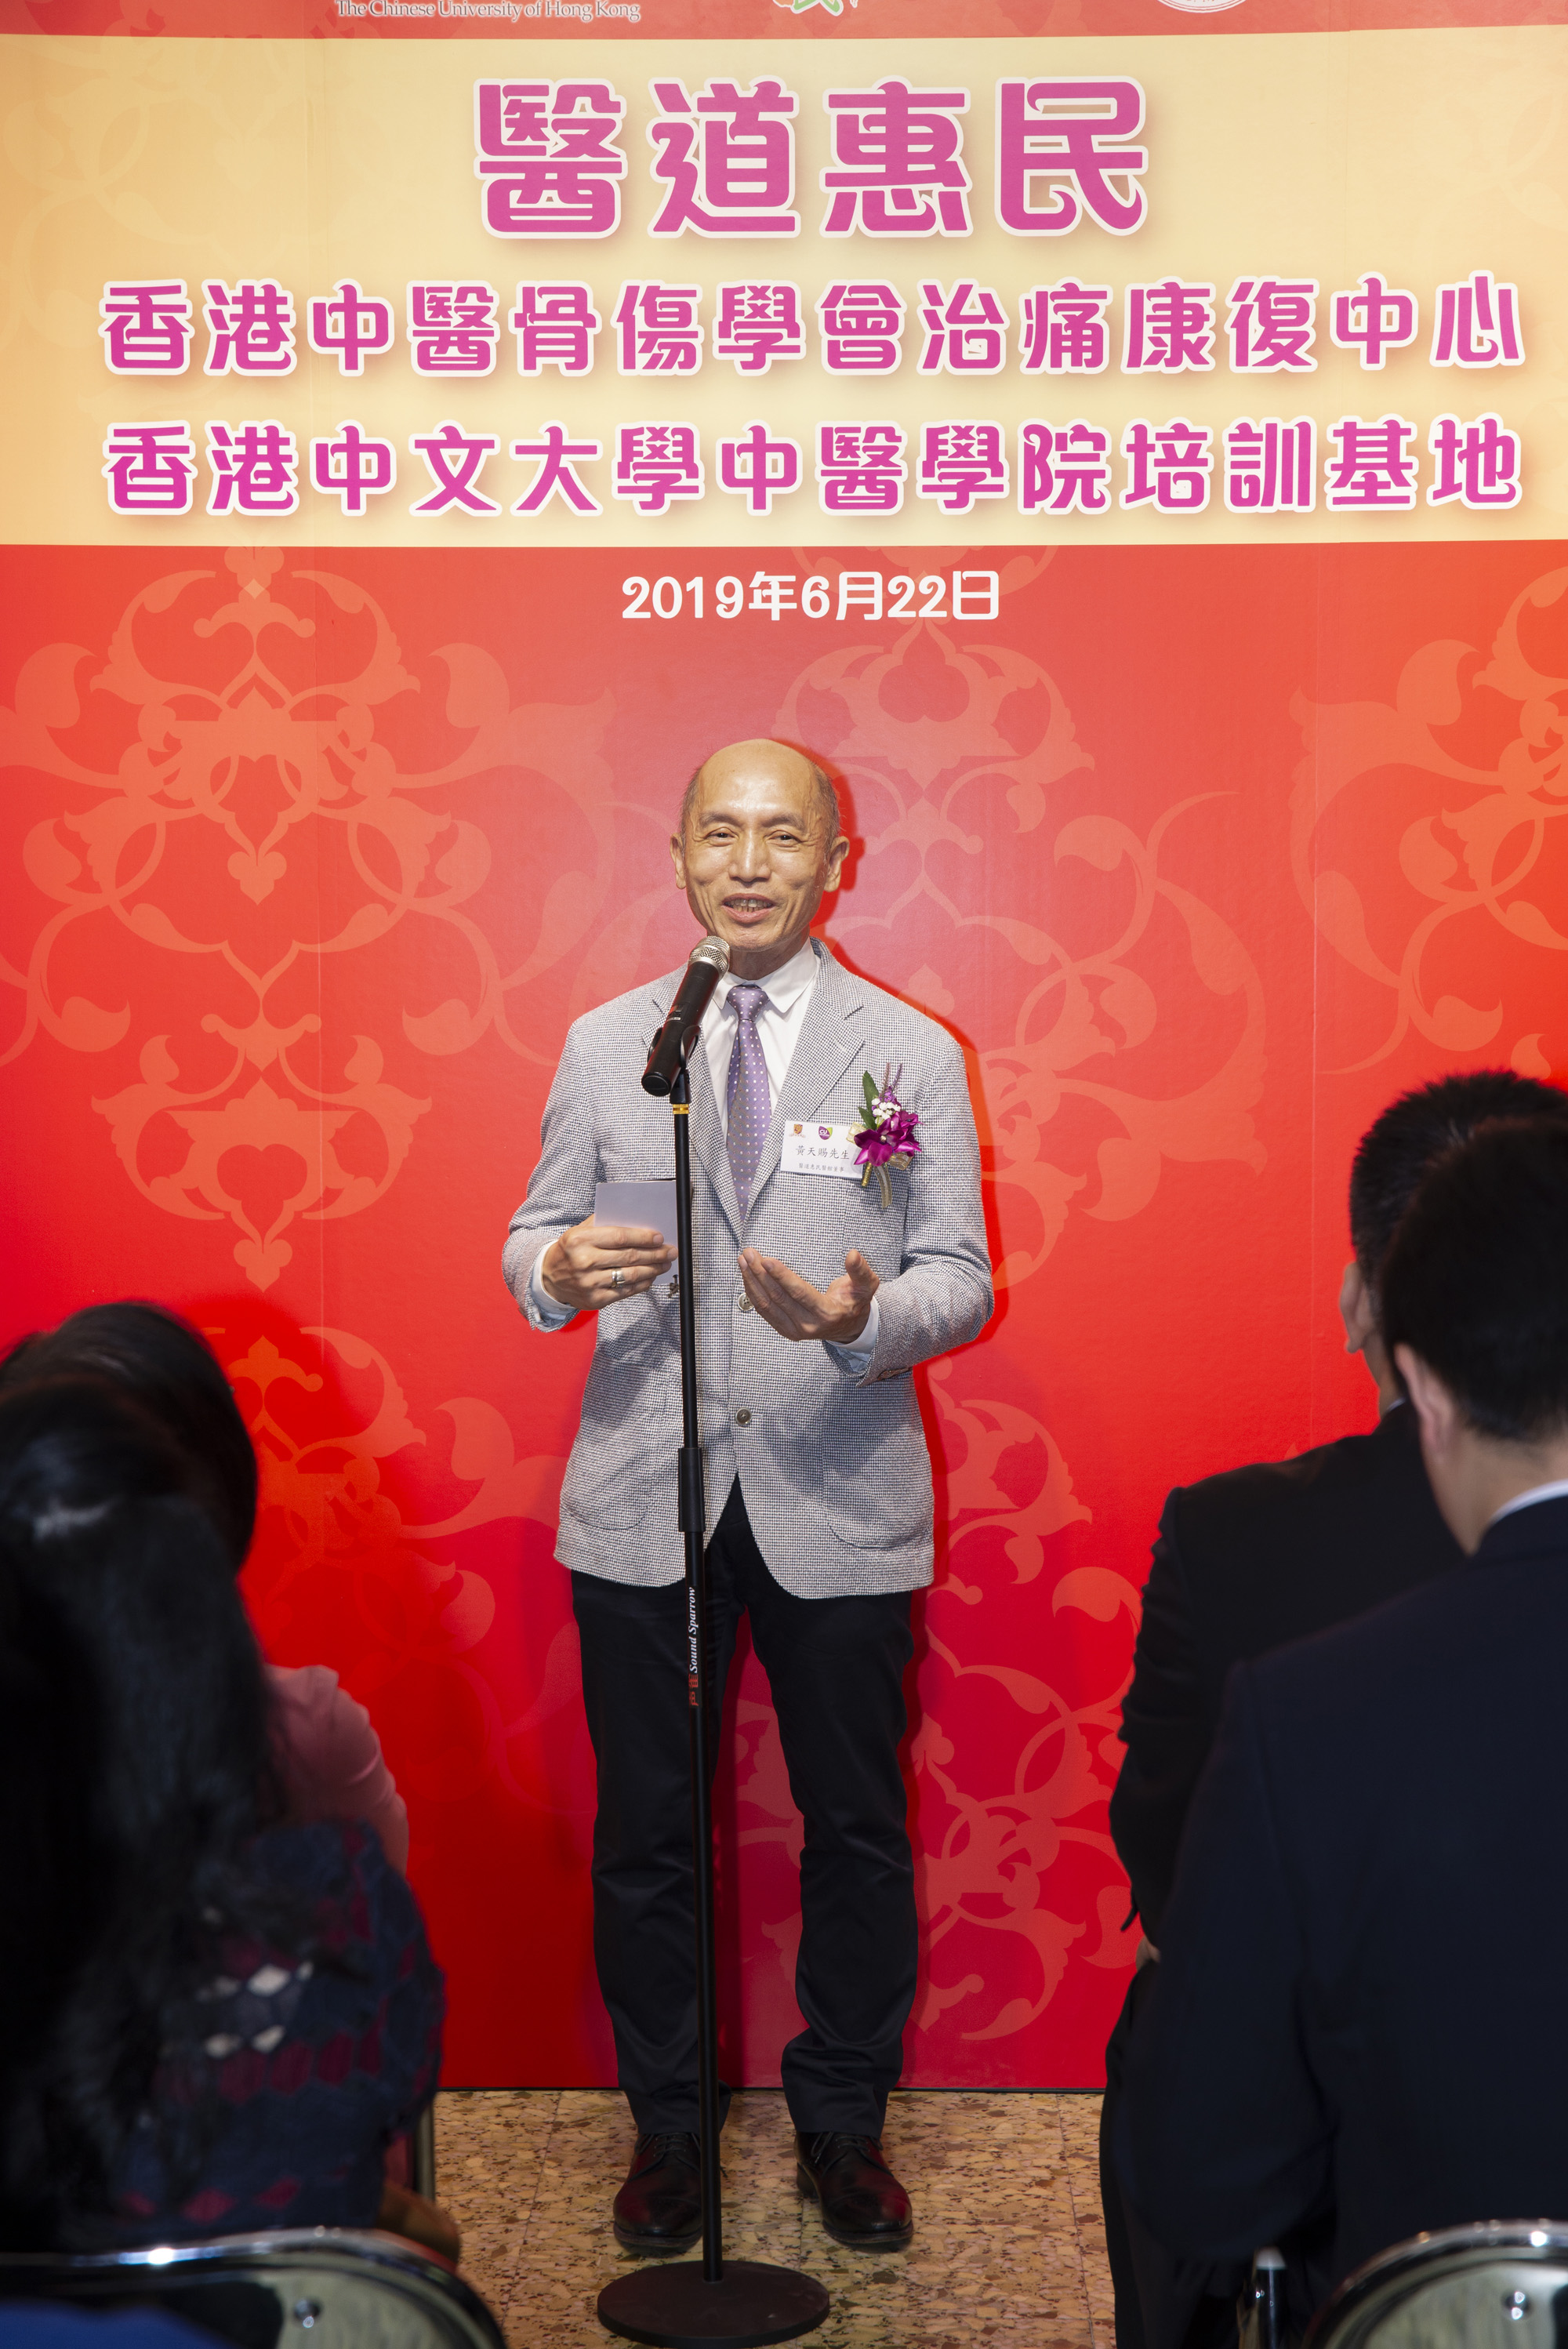 Mr. WONG Tin Chee, Director of the Community Med Care Clinic, says that his reason for opening the Clinic is to offer Chinese medicine services to those in need.